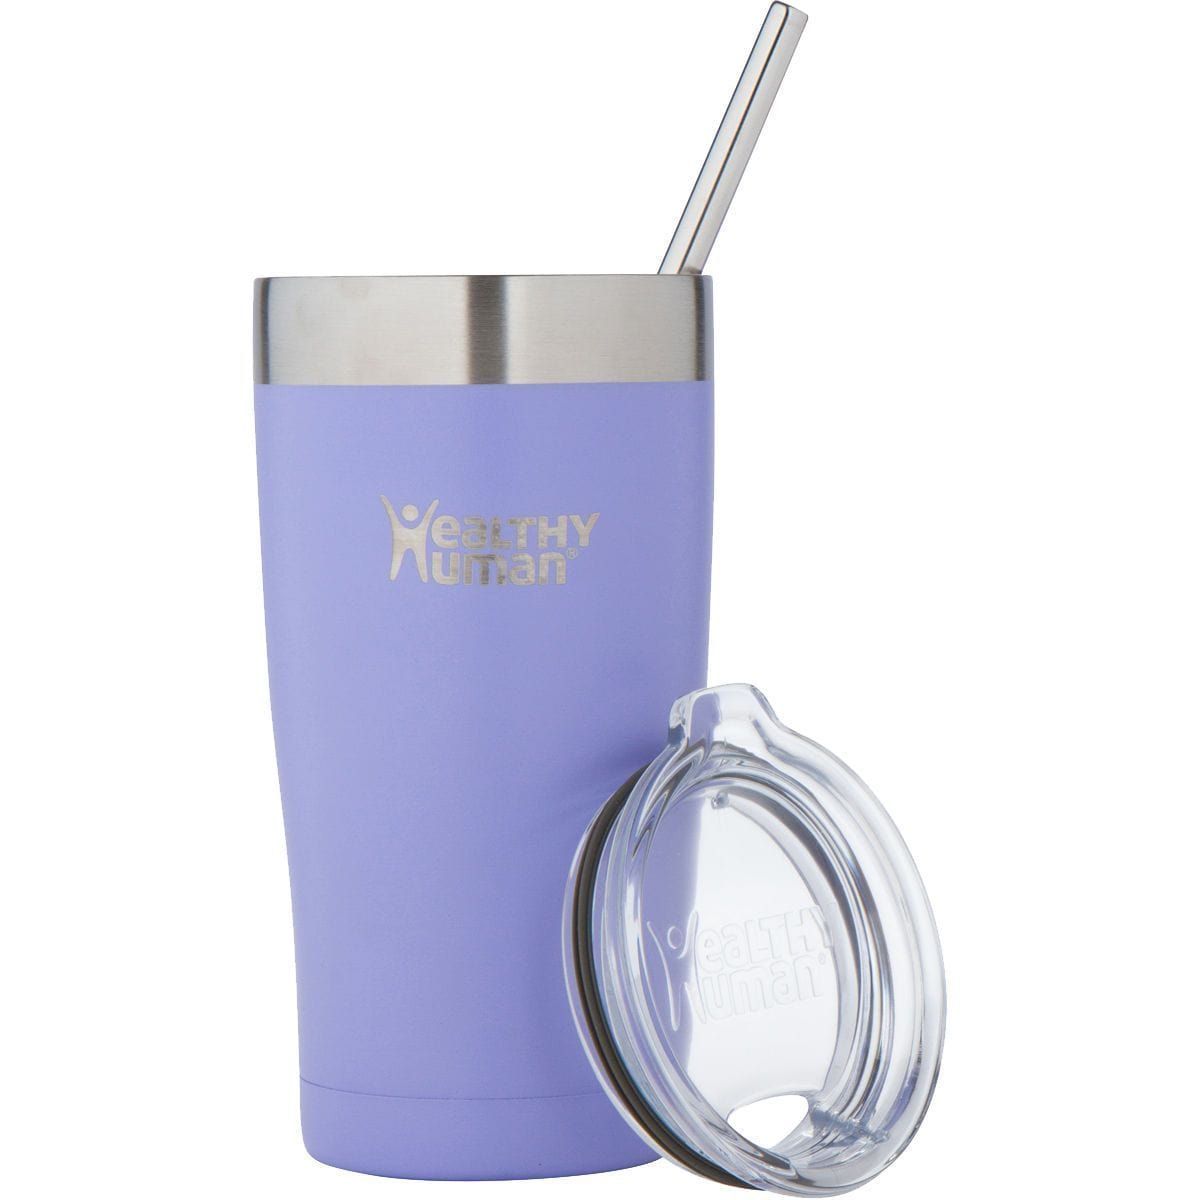 20 oz Stainless Steel Tumbler Insulated Coffee Cup Travel Mug With Straw